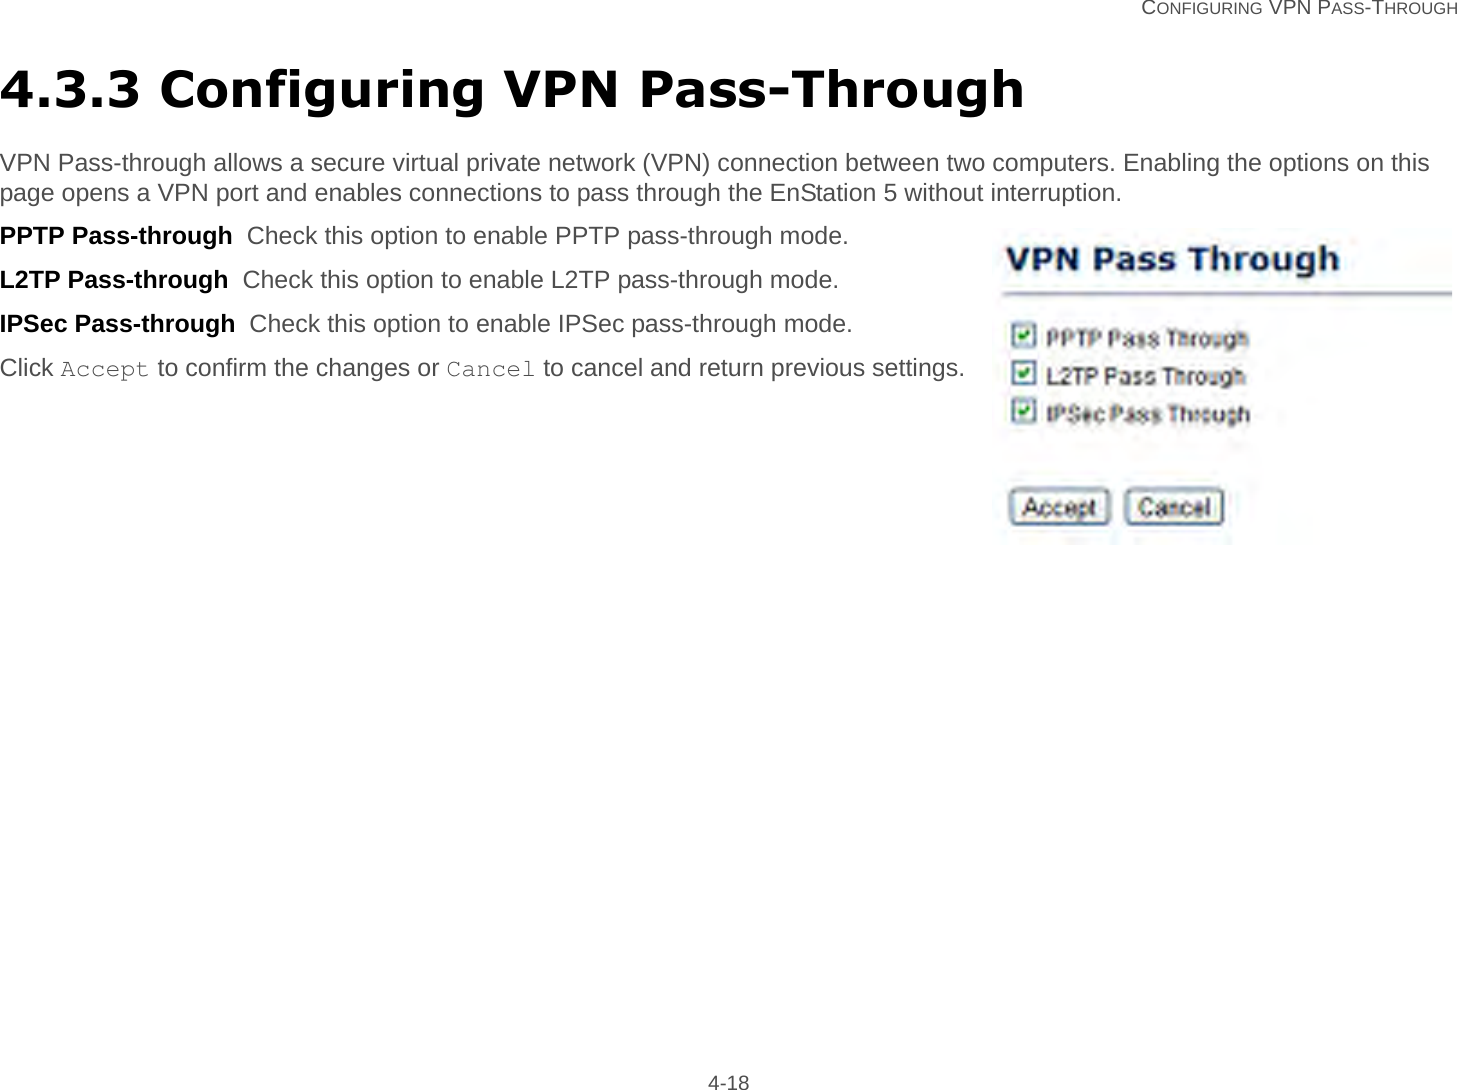   CONFIGURING VPN PASS-THROUGH 4-184.3.3 Configuring VPN Pass-ThroughVPN Pass-through allows a secure virtual private network (VPN) connection between two computers. Enabling the options on this page opens a VPN port and enables connections to pass through the EnStation 5 without interruption.PPTP Pass-through  Check this option to enable PPTP pass-through mode.L2TP Pass-through  Check this option to enable L2TP pass-through mode.IPSec Pass-through  Check this option to enable IPSec pass-through mode.Click Accept to confirm the changes or Cancel to cancel and return previous settings.